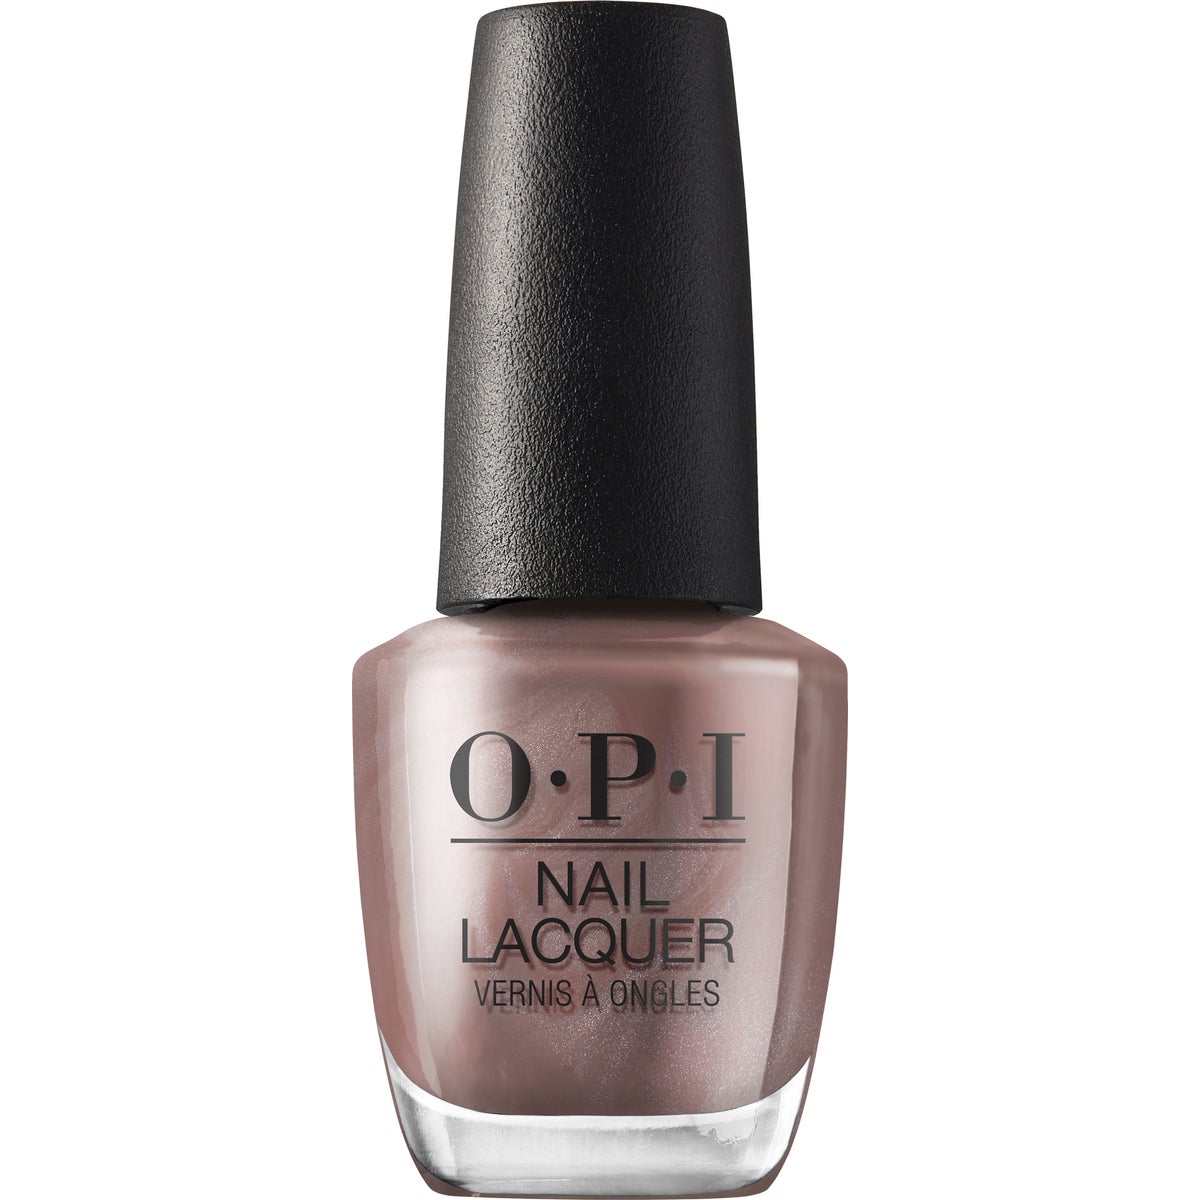 OPI Nail Lacquer Shine Bright - Gingerbread Man Can